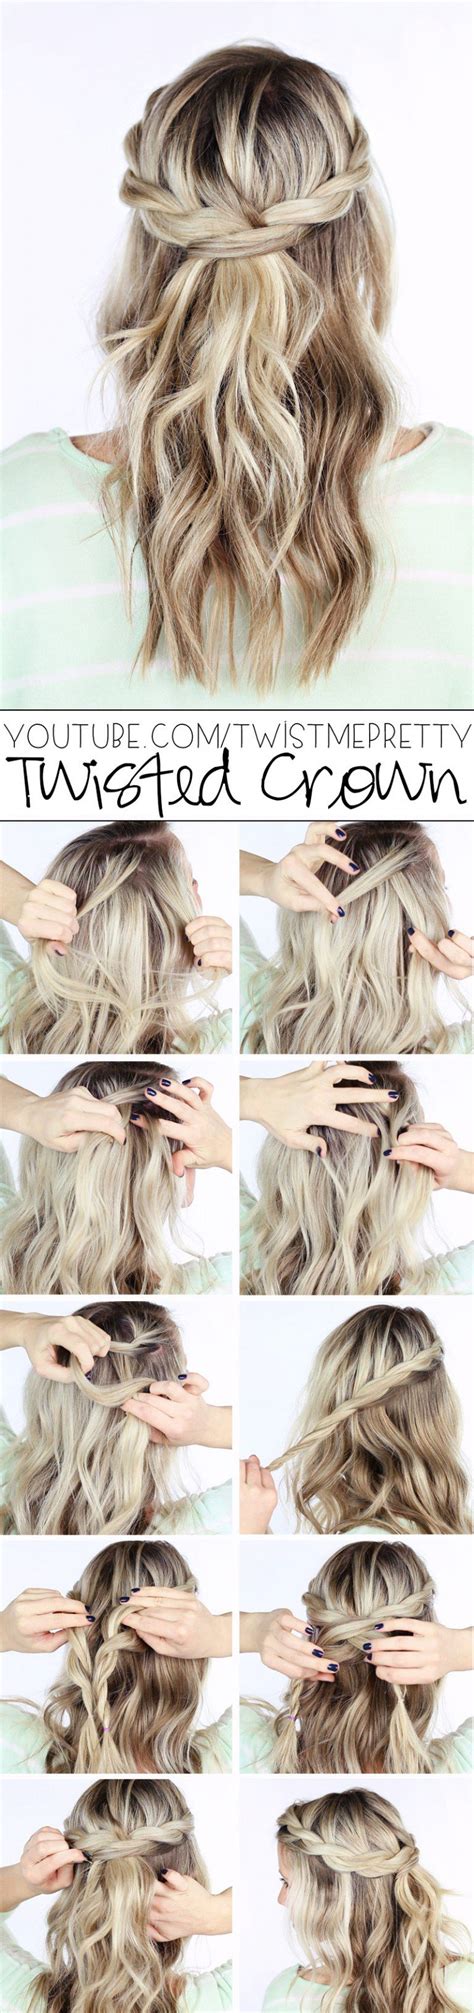 15 Easy Yet Trendy Hairstyle Tutorials You Will Love Styles Weekly